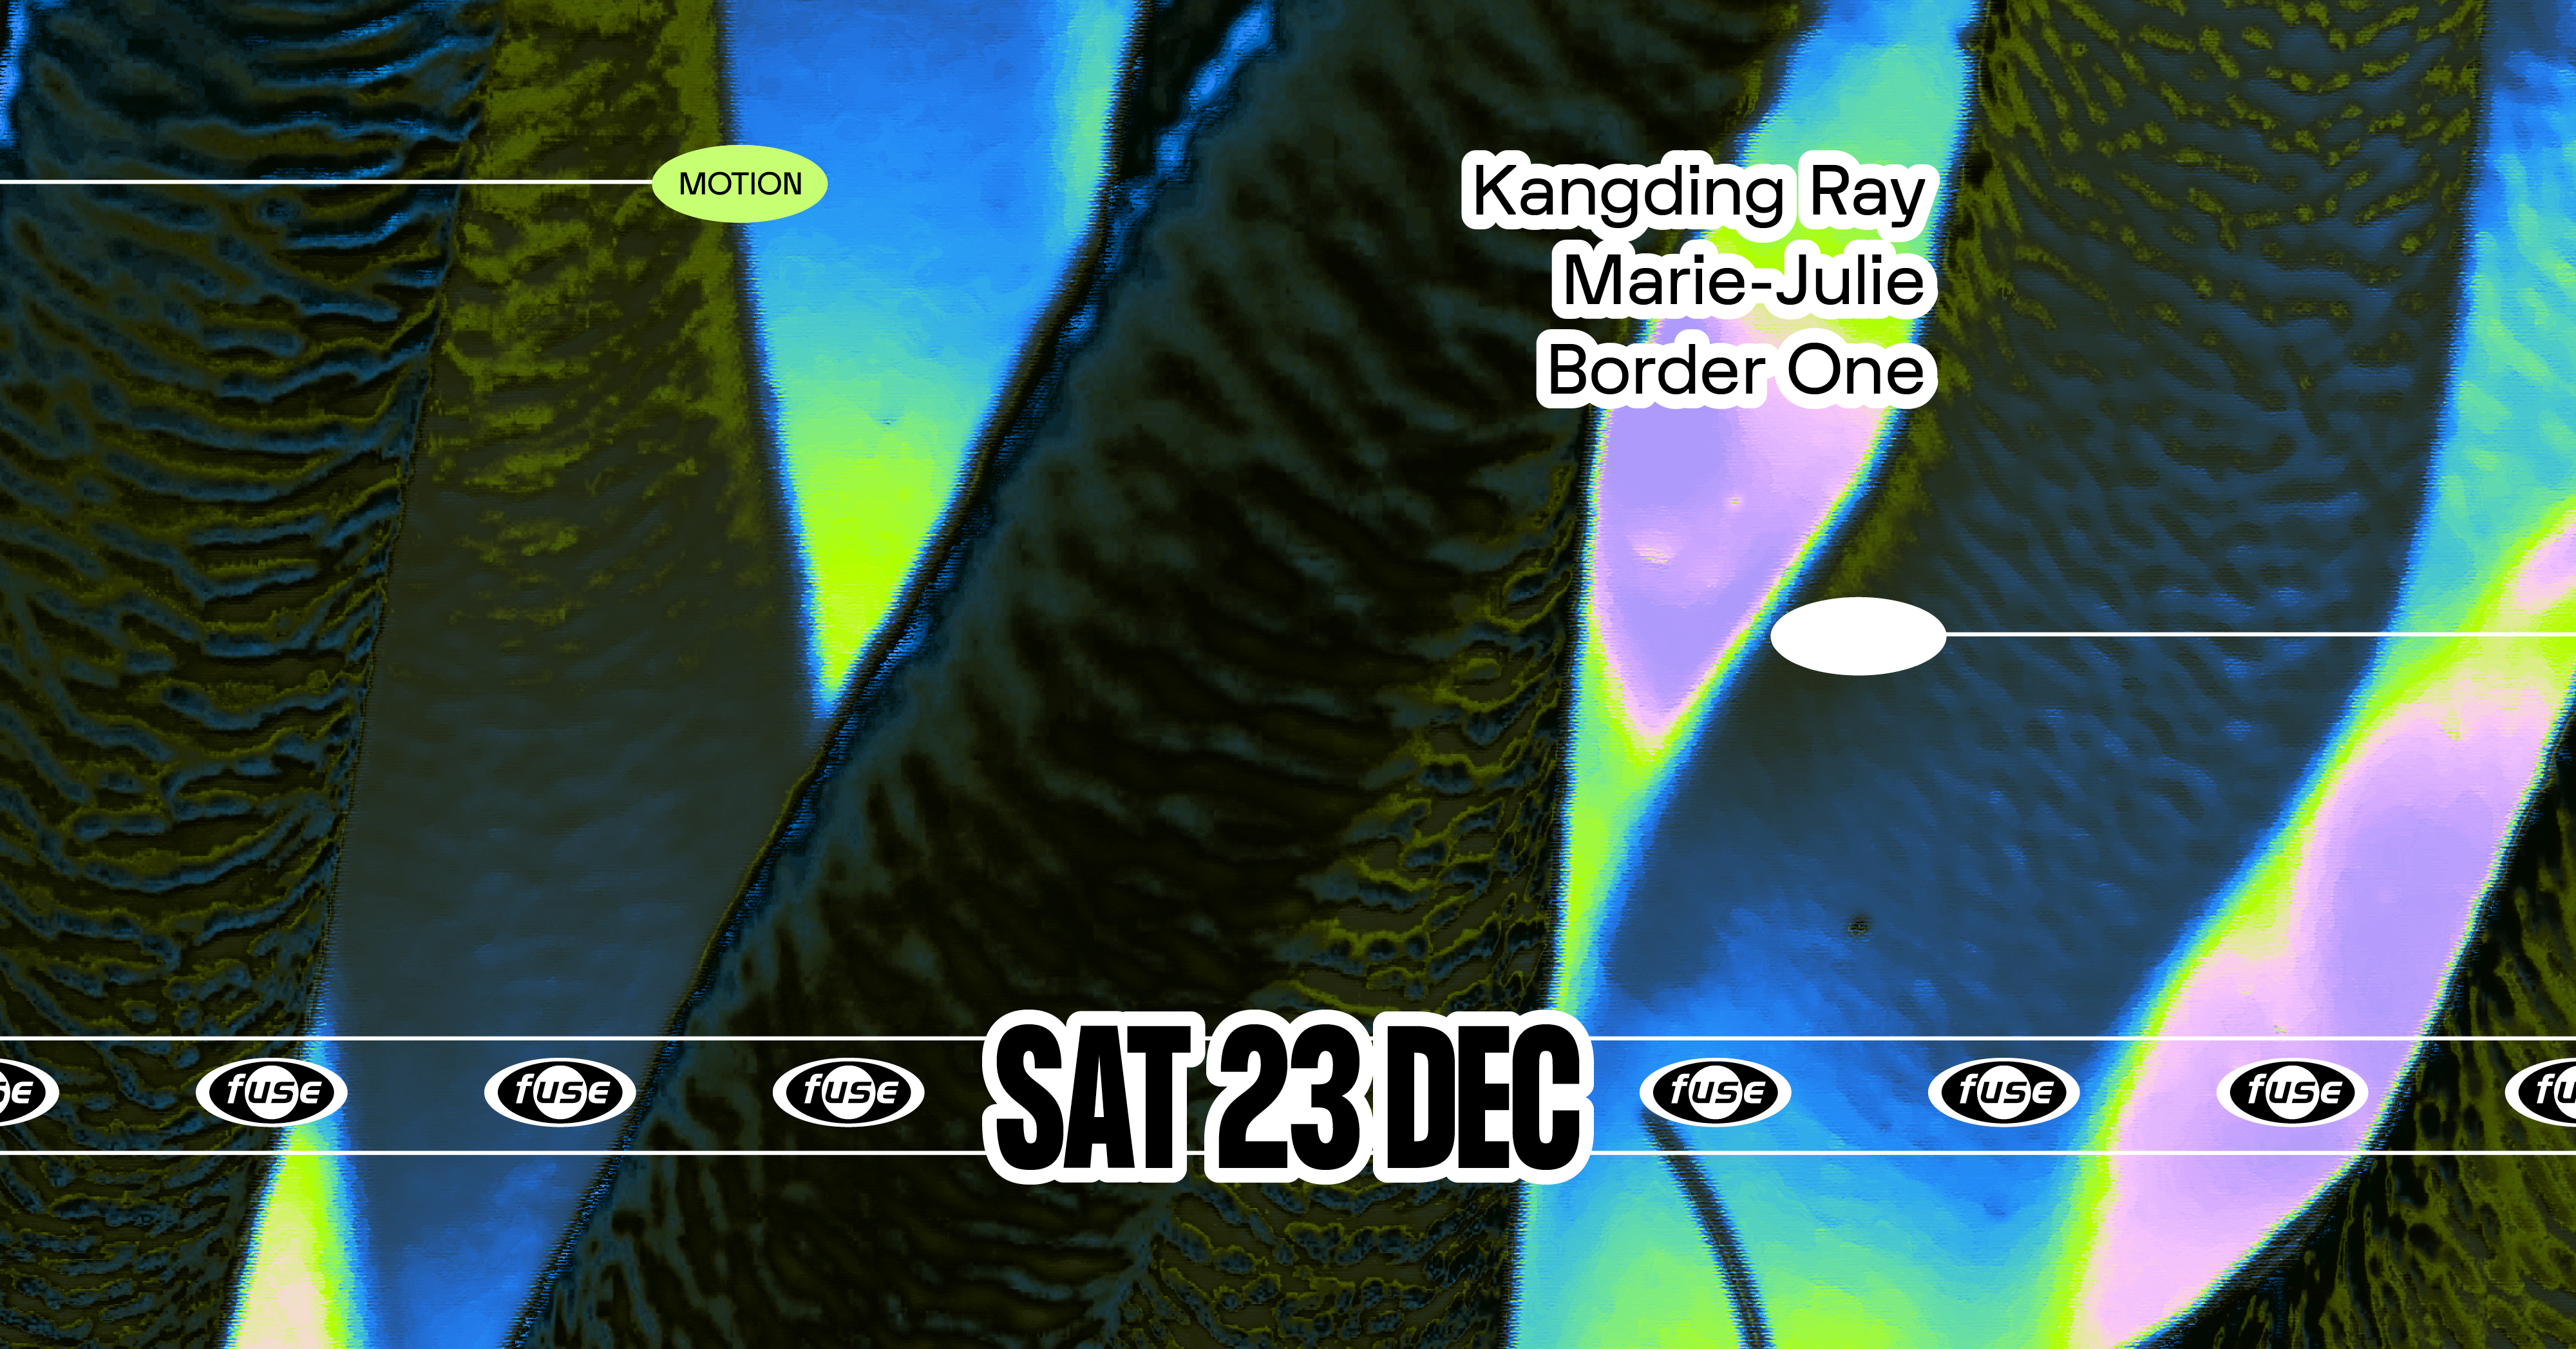 Fuse presents: Kangding Ray, Marie-Julie & Border One - Página frontal